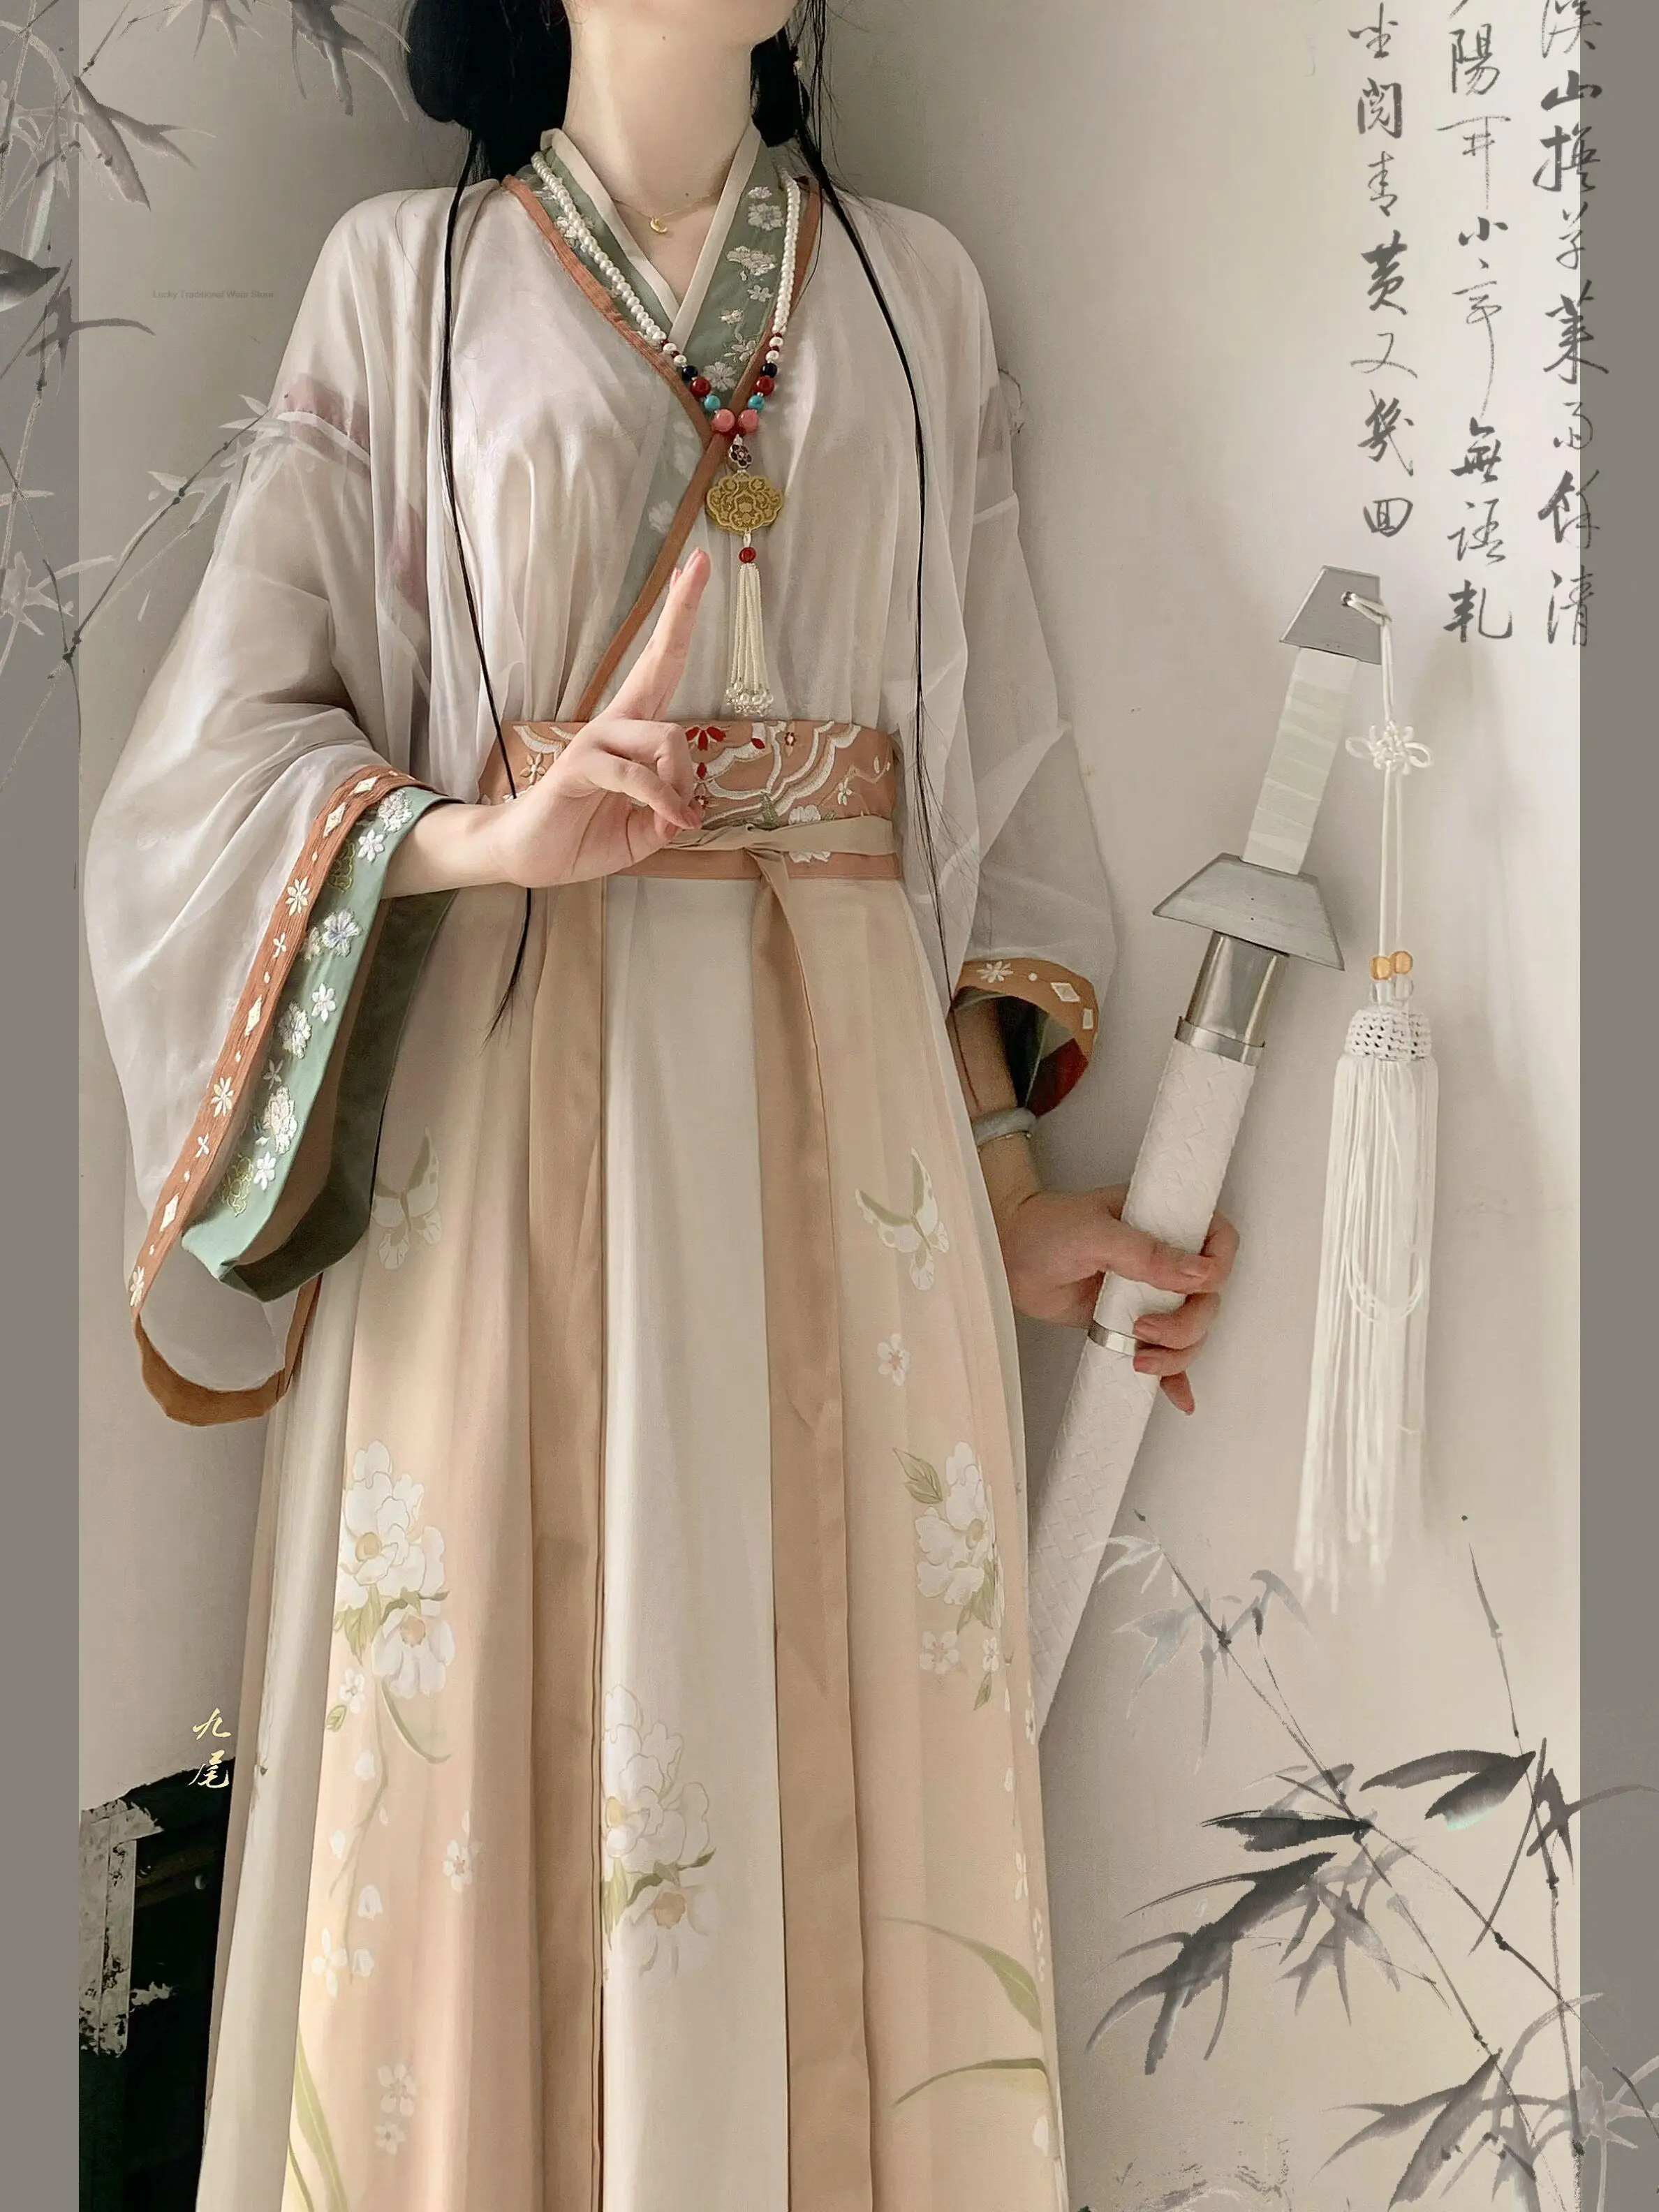 Hanfu Dress Women Ancient Chinese Traditional Folk Dance Hanfu Set Song Dynasty Female Cosplay Costume Vintage Party Outfit T1